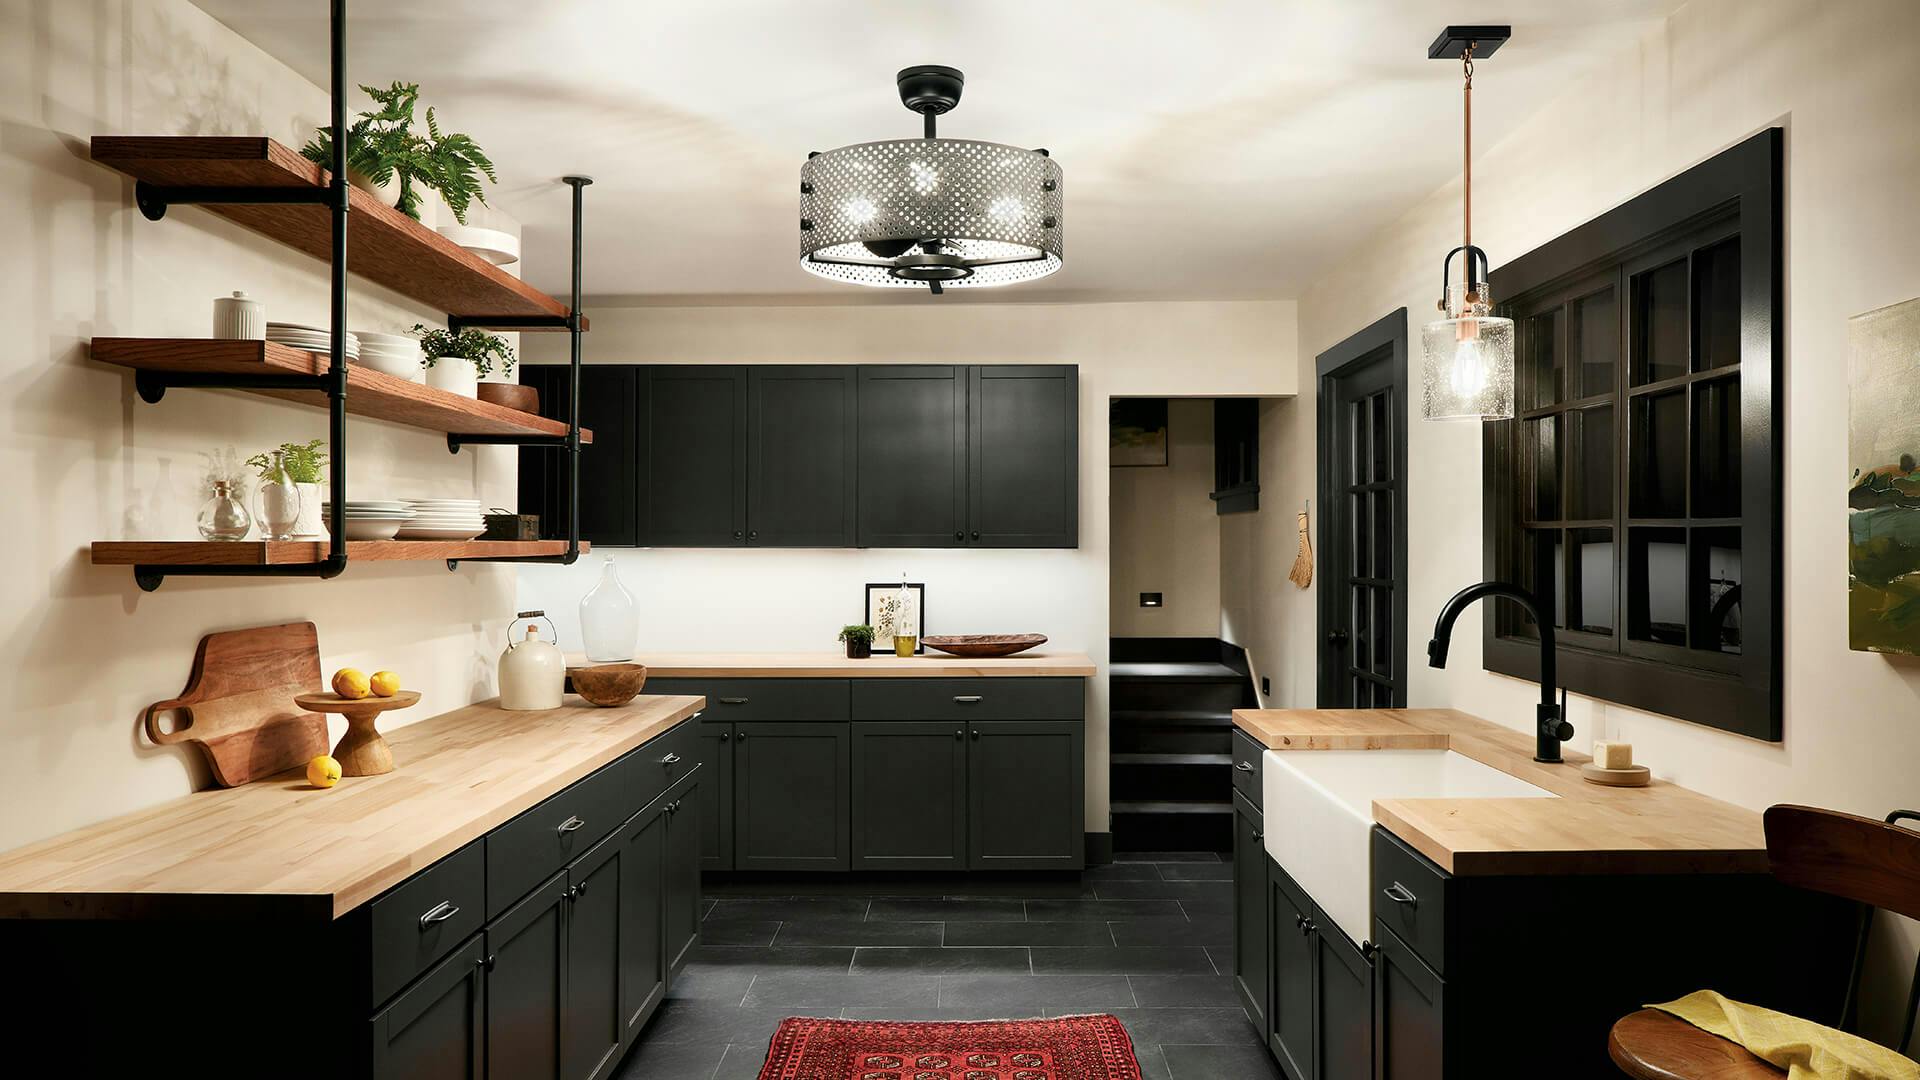 Kitchen at night with black cabinets and Eyrie chandelier in black finish